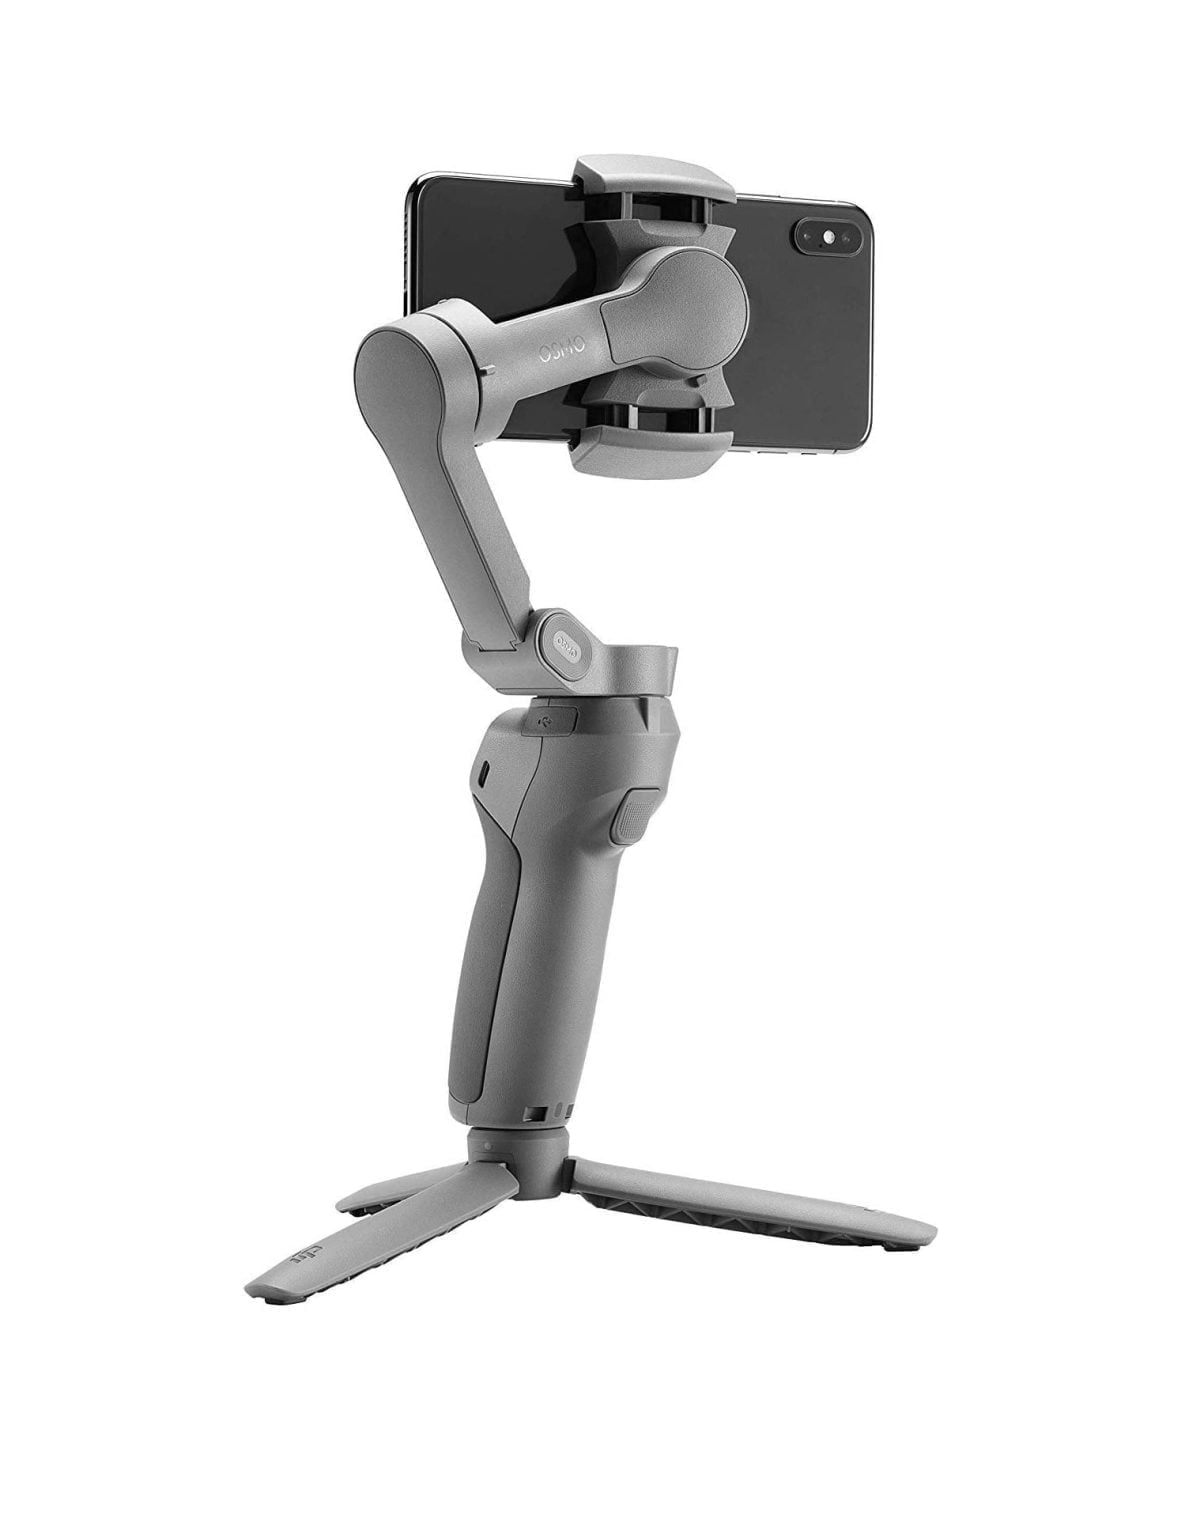 61Ecirjdqll. Ac Sl1500 Dji &Lt;A Href=&Quot;Https://Www.dji.com/Ae/Osmo-Mobile-3?From=Store-Product-Page&Quot;&Gt;Osmo Mobile 3 Official Product Page&Lt;/A&Gt; &Lt;H1 Class=&Quot;Product-Name Logo&Quot;&Gt; Osmo Mobile 3 Combo&Lt;/H1&Gt; &Lt;Div Class=&Quot;Product-Cover&Quot;&Gt; &Lt;Img Class=&Quot;Alignnone Size-Medium Wp-Image-5354&Quot; Src=&Quot;Https://Lablaab.com/Wp-Content/Uploads/2019/11/Annotation-2019-11-05-113239-300X92.Jpg&Quot; Alt=&Quot;&Quot; Width=&Quot;300&Quot; Height=&Quot;92&Quot; /&Gt; 1. Slow Motion Is Currently Only Supported By Ios Devices. 2. You Can Also Transition Between Portrait And Landscape Mode By Rotating The Roll Axis Manually. 3. Activate This Function In Settings. By Default, If You Press The M Button Once, You Can Quickly Switch Between Taking A Photo And Recording A Video. &Lt;/Div&Gt; Dji Osmo Mobile 3 Combo